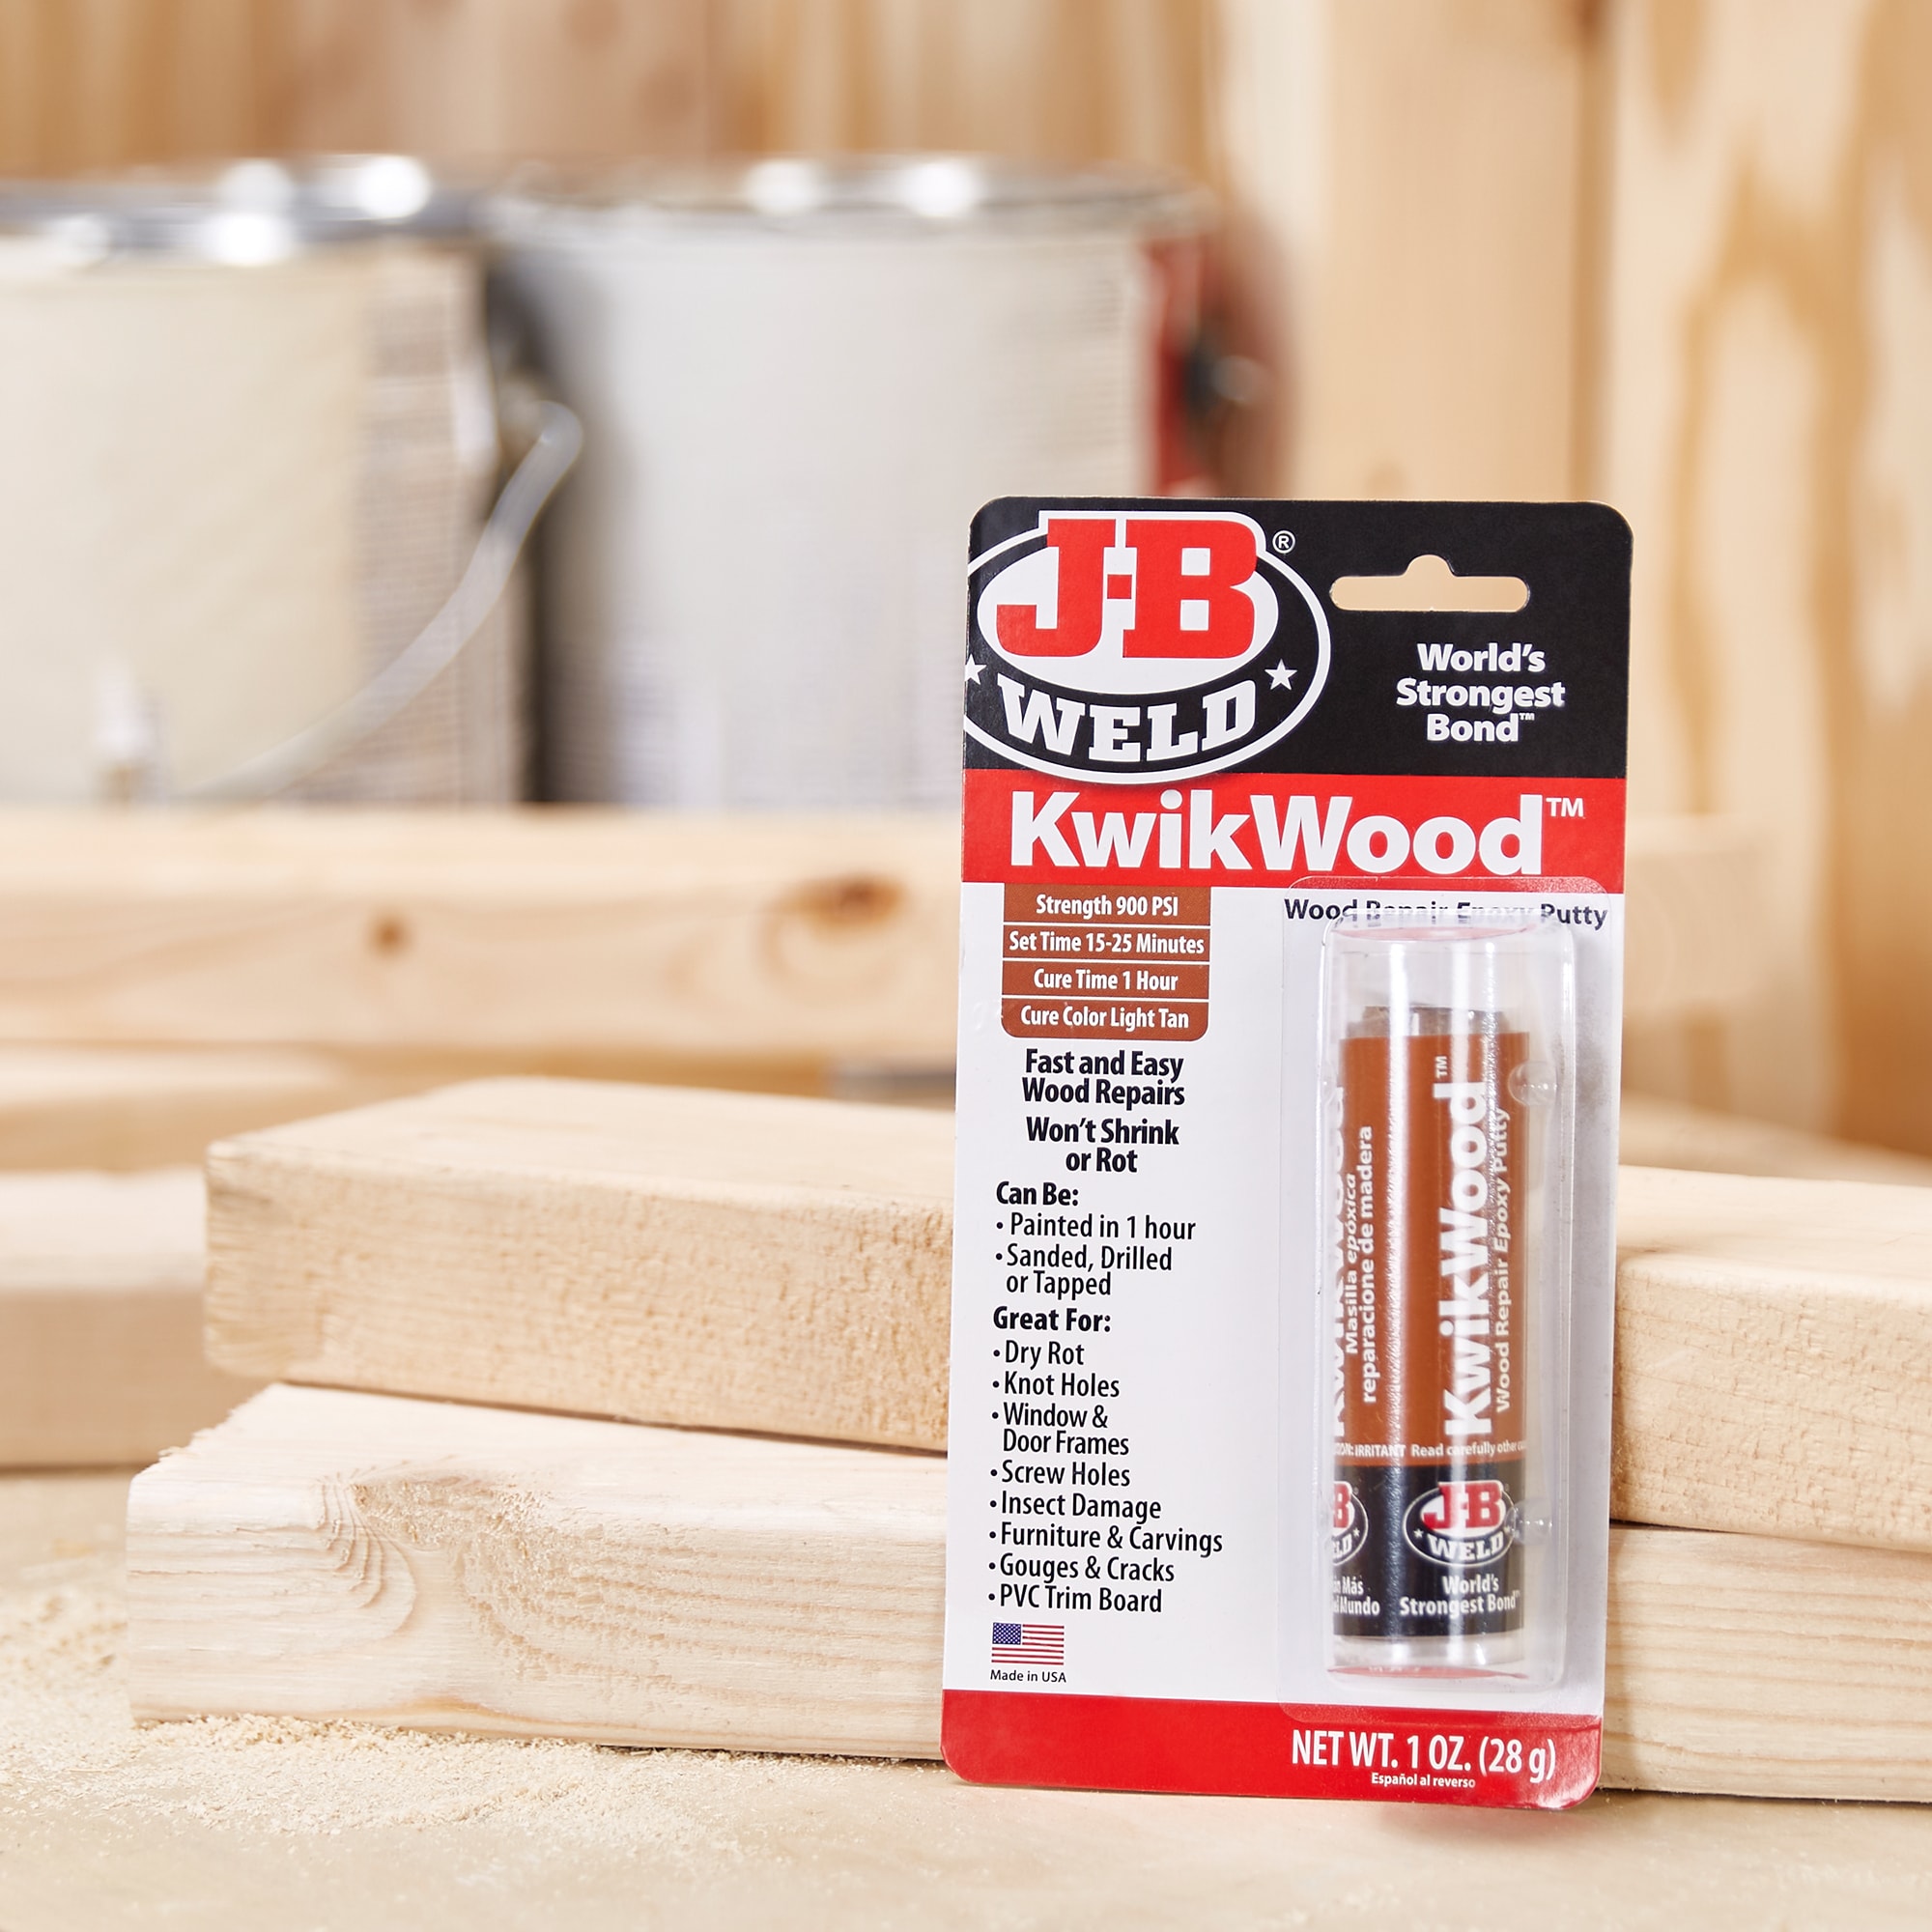 5 Best Epoxy Wood Fillers for Voids and Rotting Wood